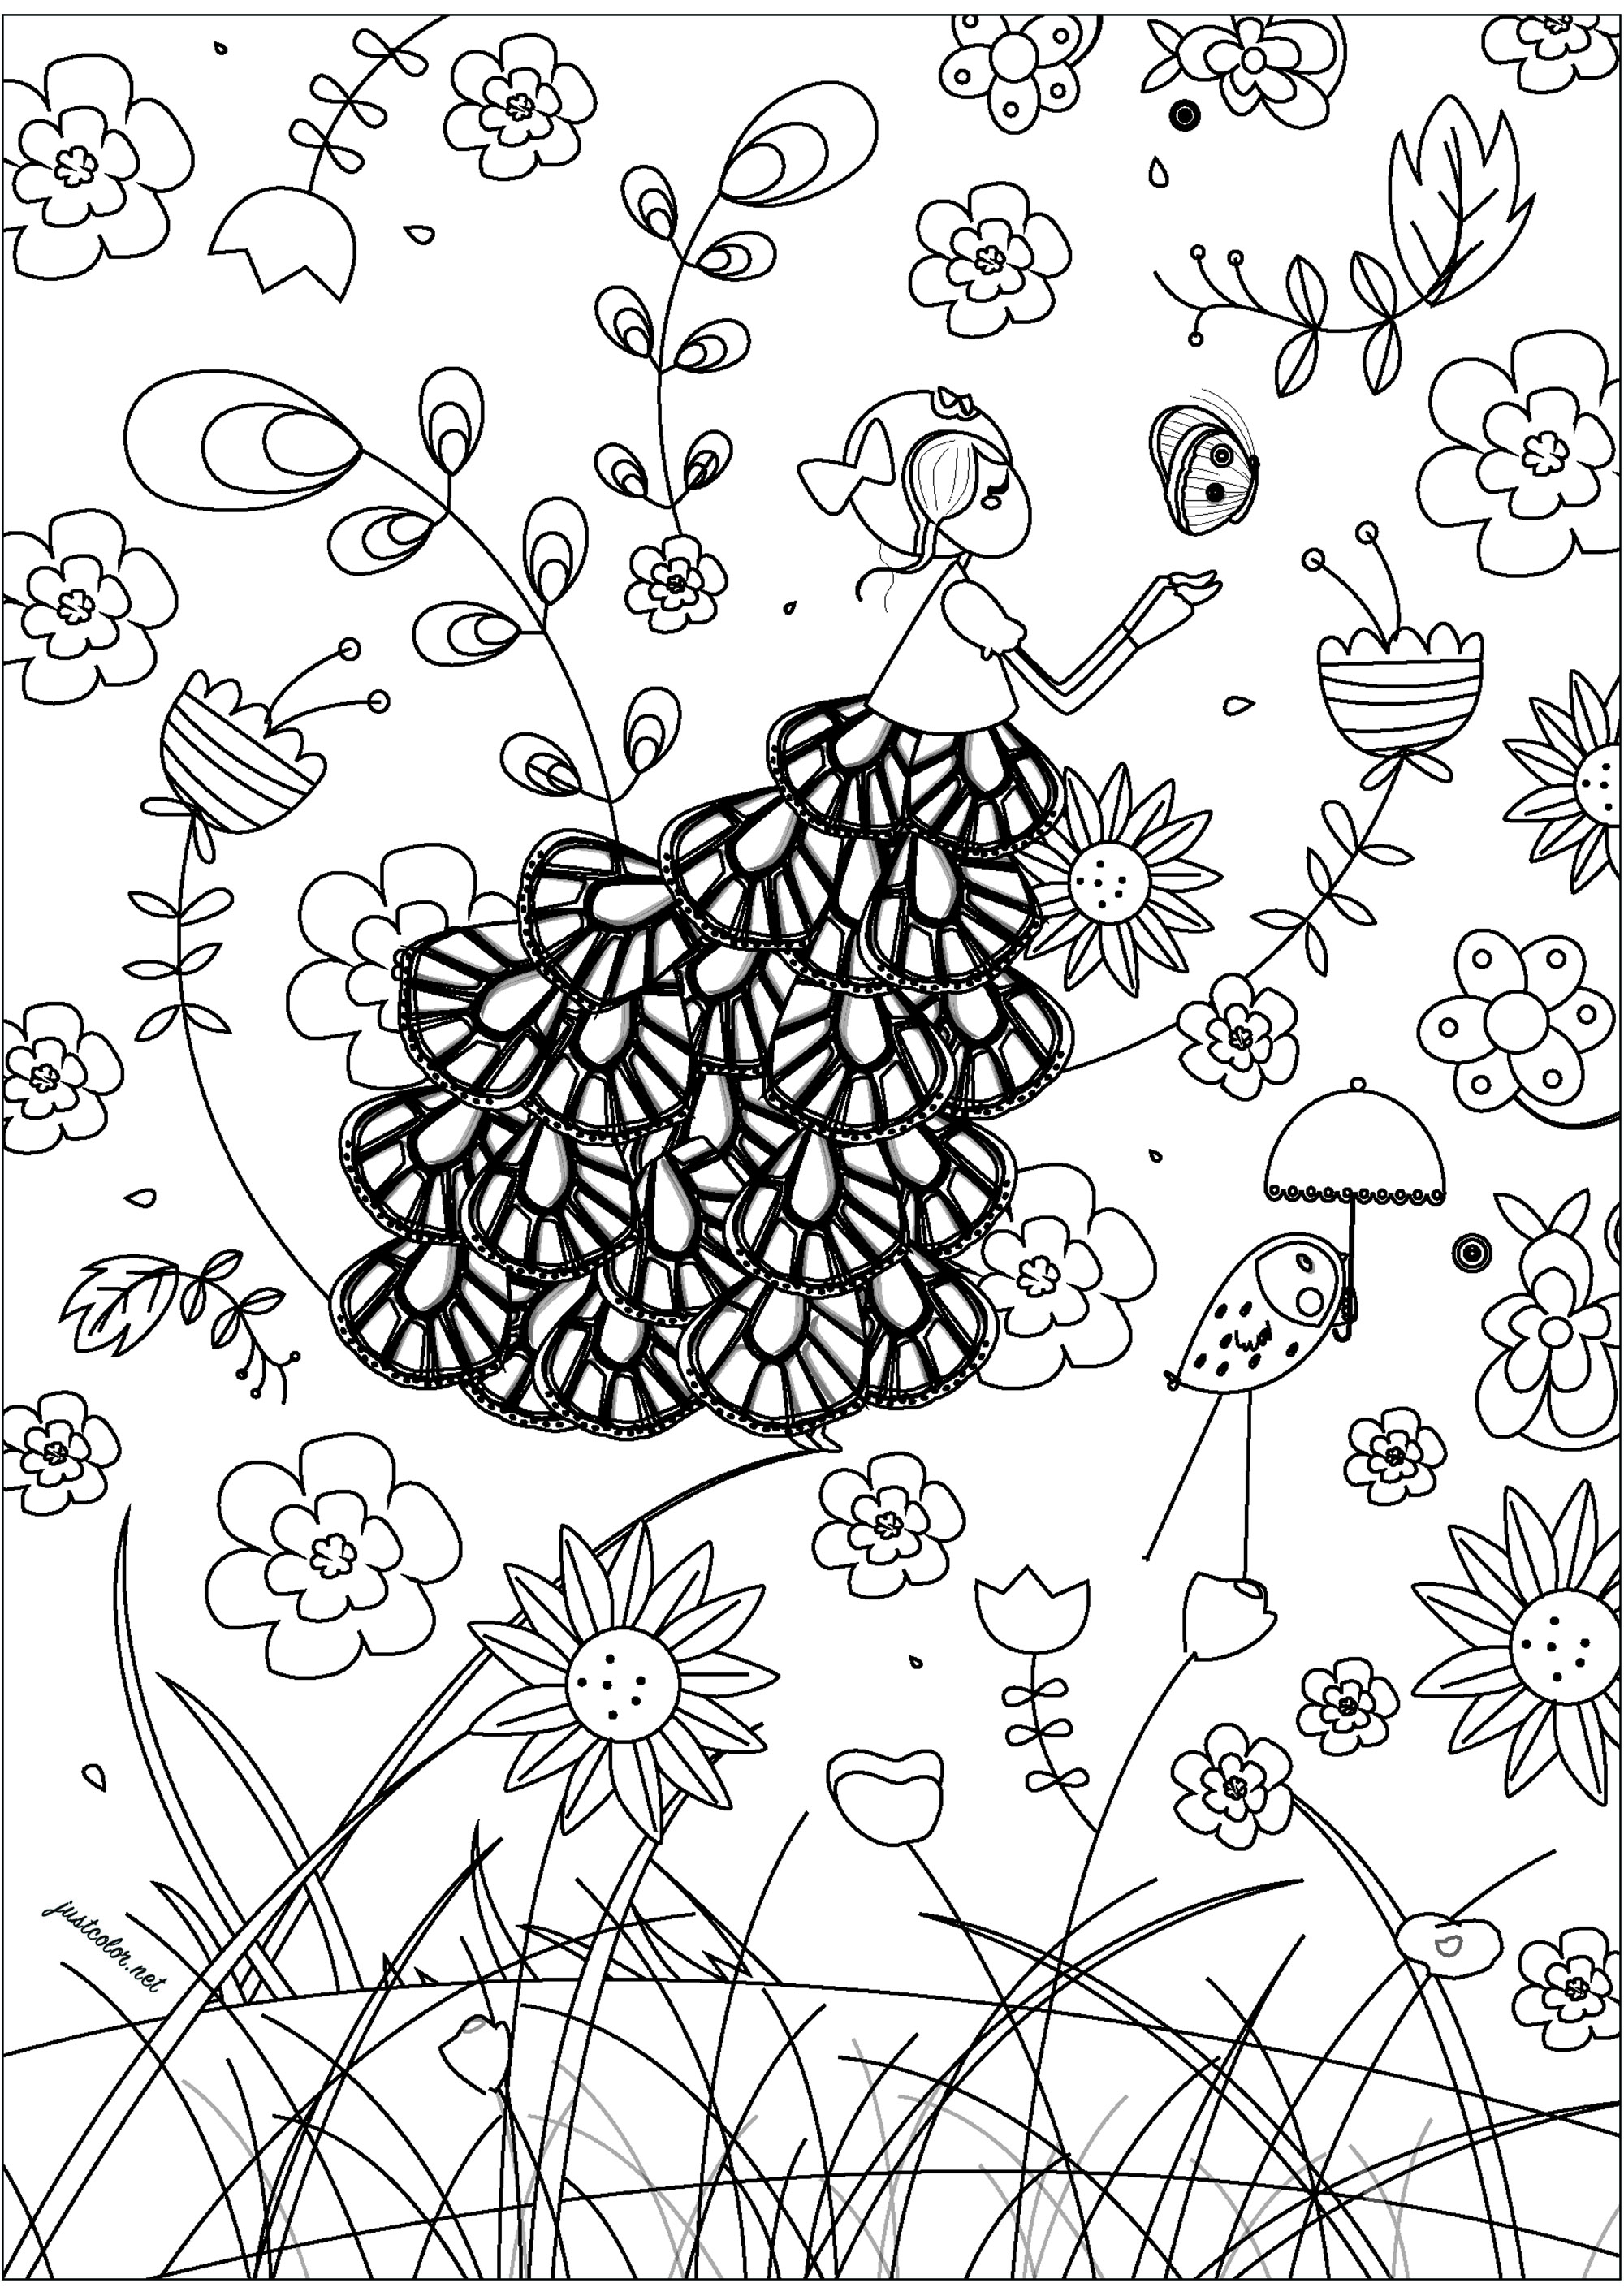 Fairy floating in the middle of field flowers. This coloring page is an invitation to daydream and relax. An elegant fairy floats amidst a variety of beautiful flowers, creating an enchanting landscape.